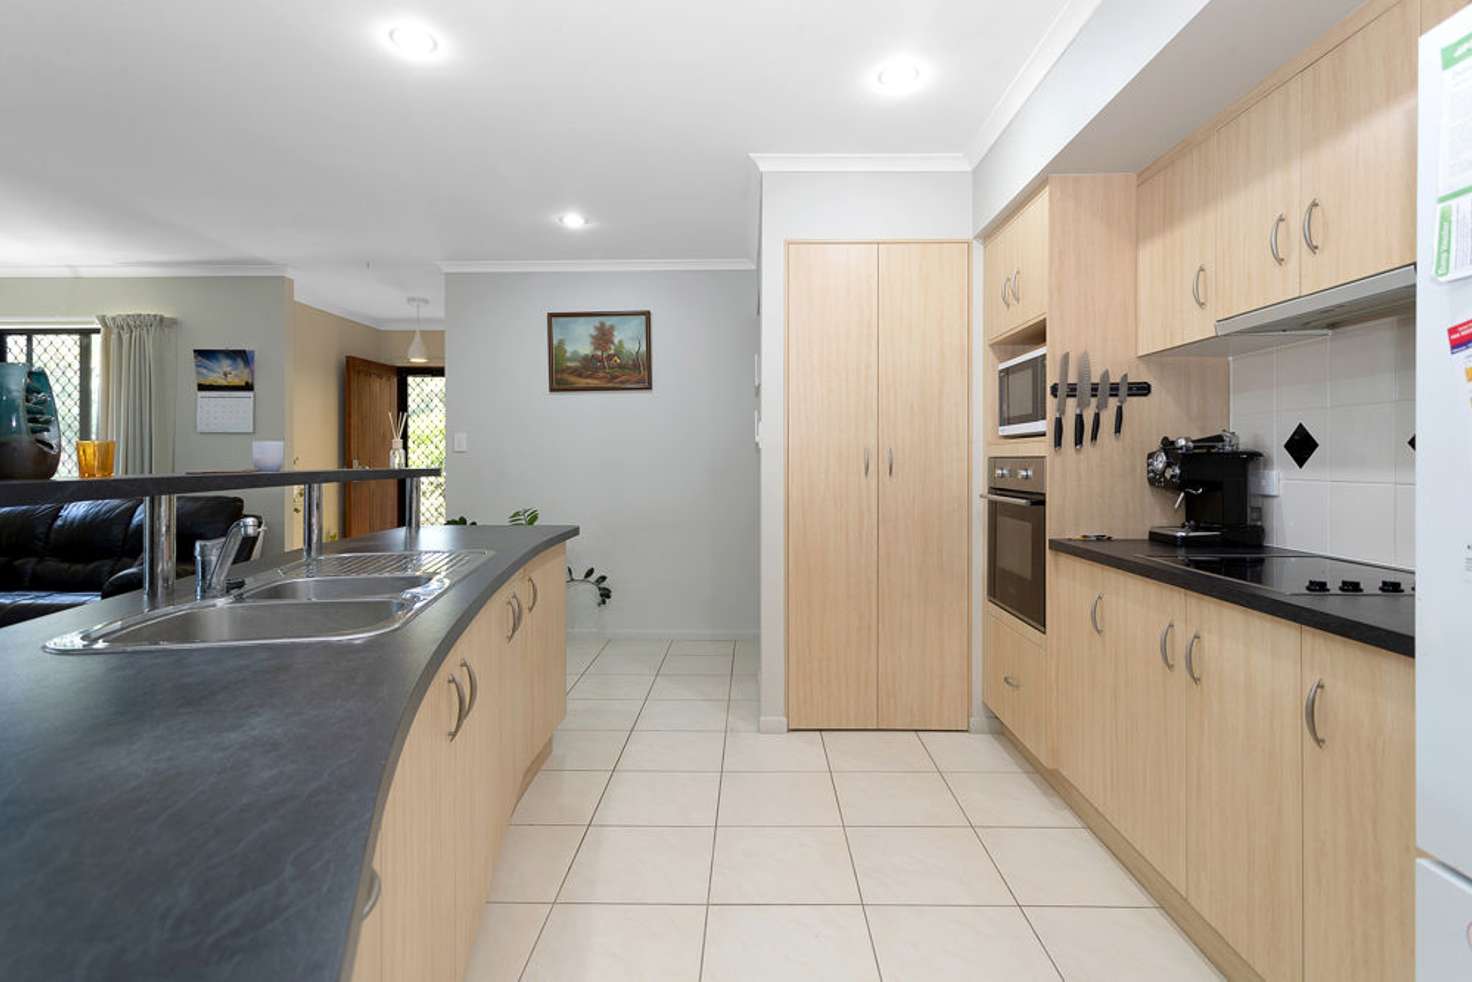 Main view of Homely house listing, 12 Seacove Court, Eimeo QLD 4740